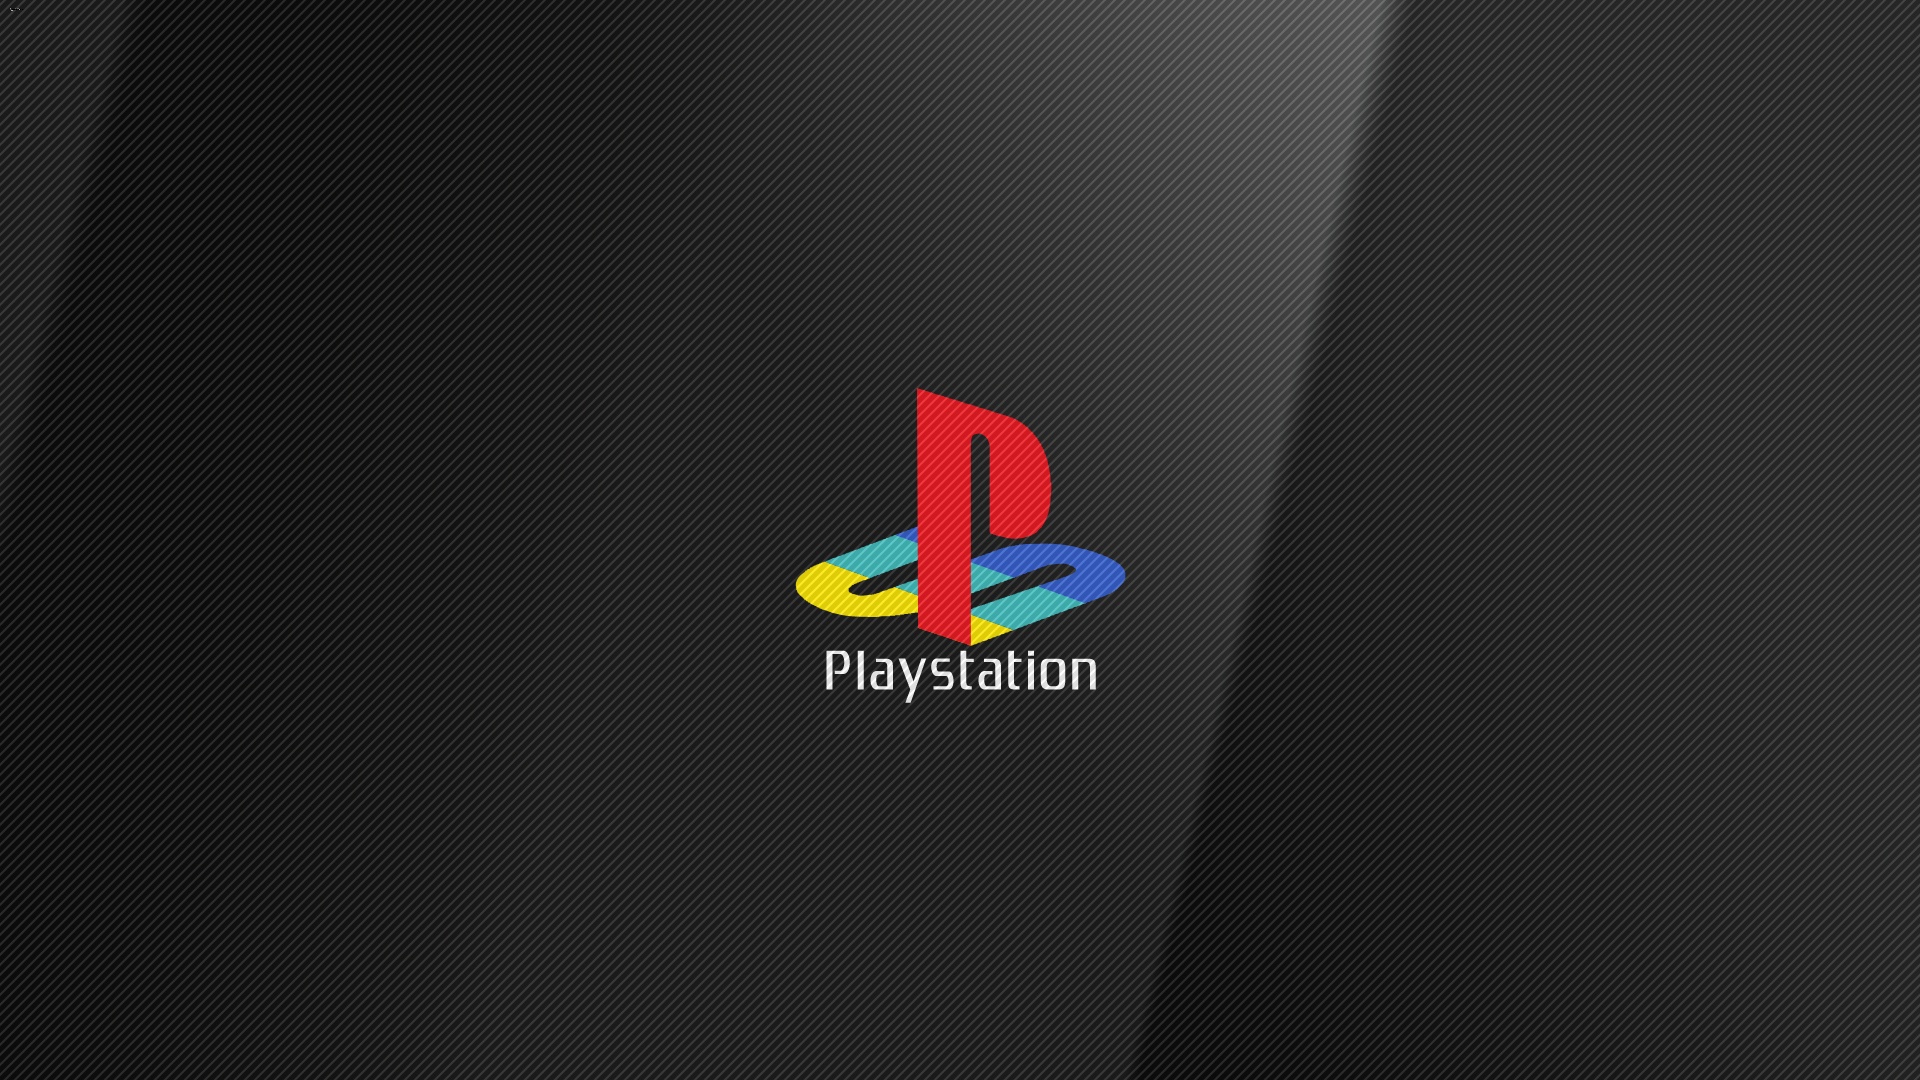 Playstation Wallpaper Image Amp Pictures Becuo